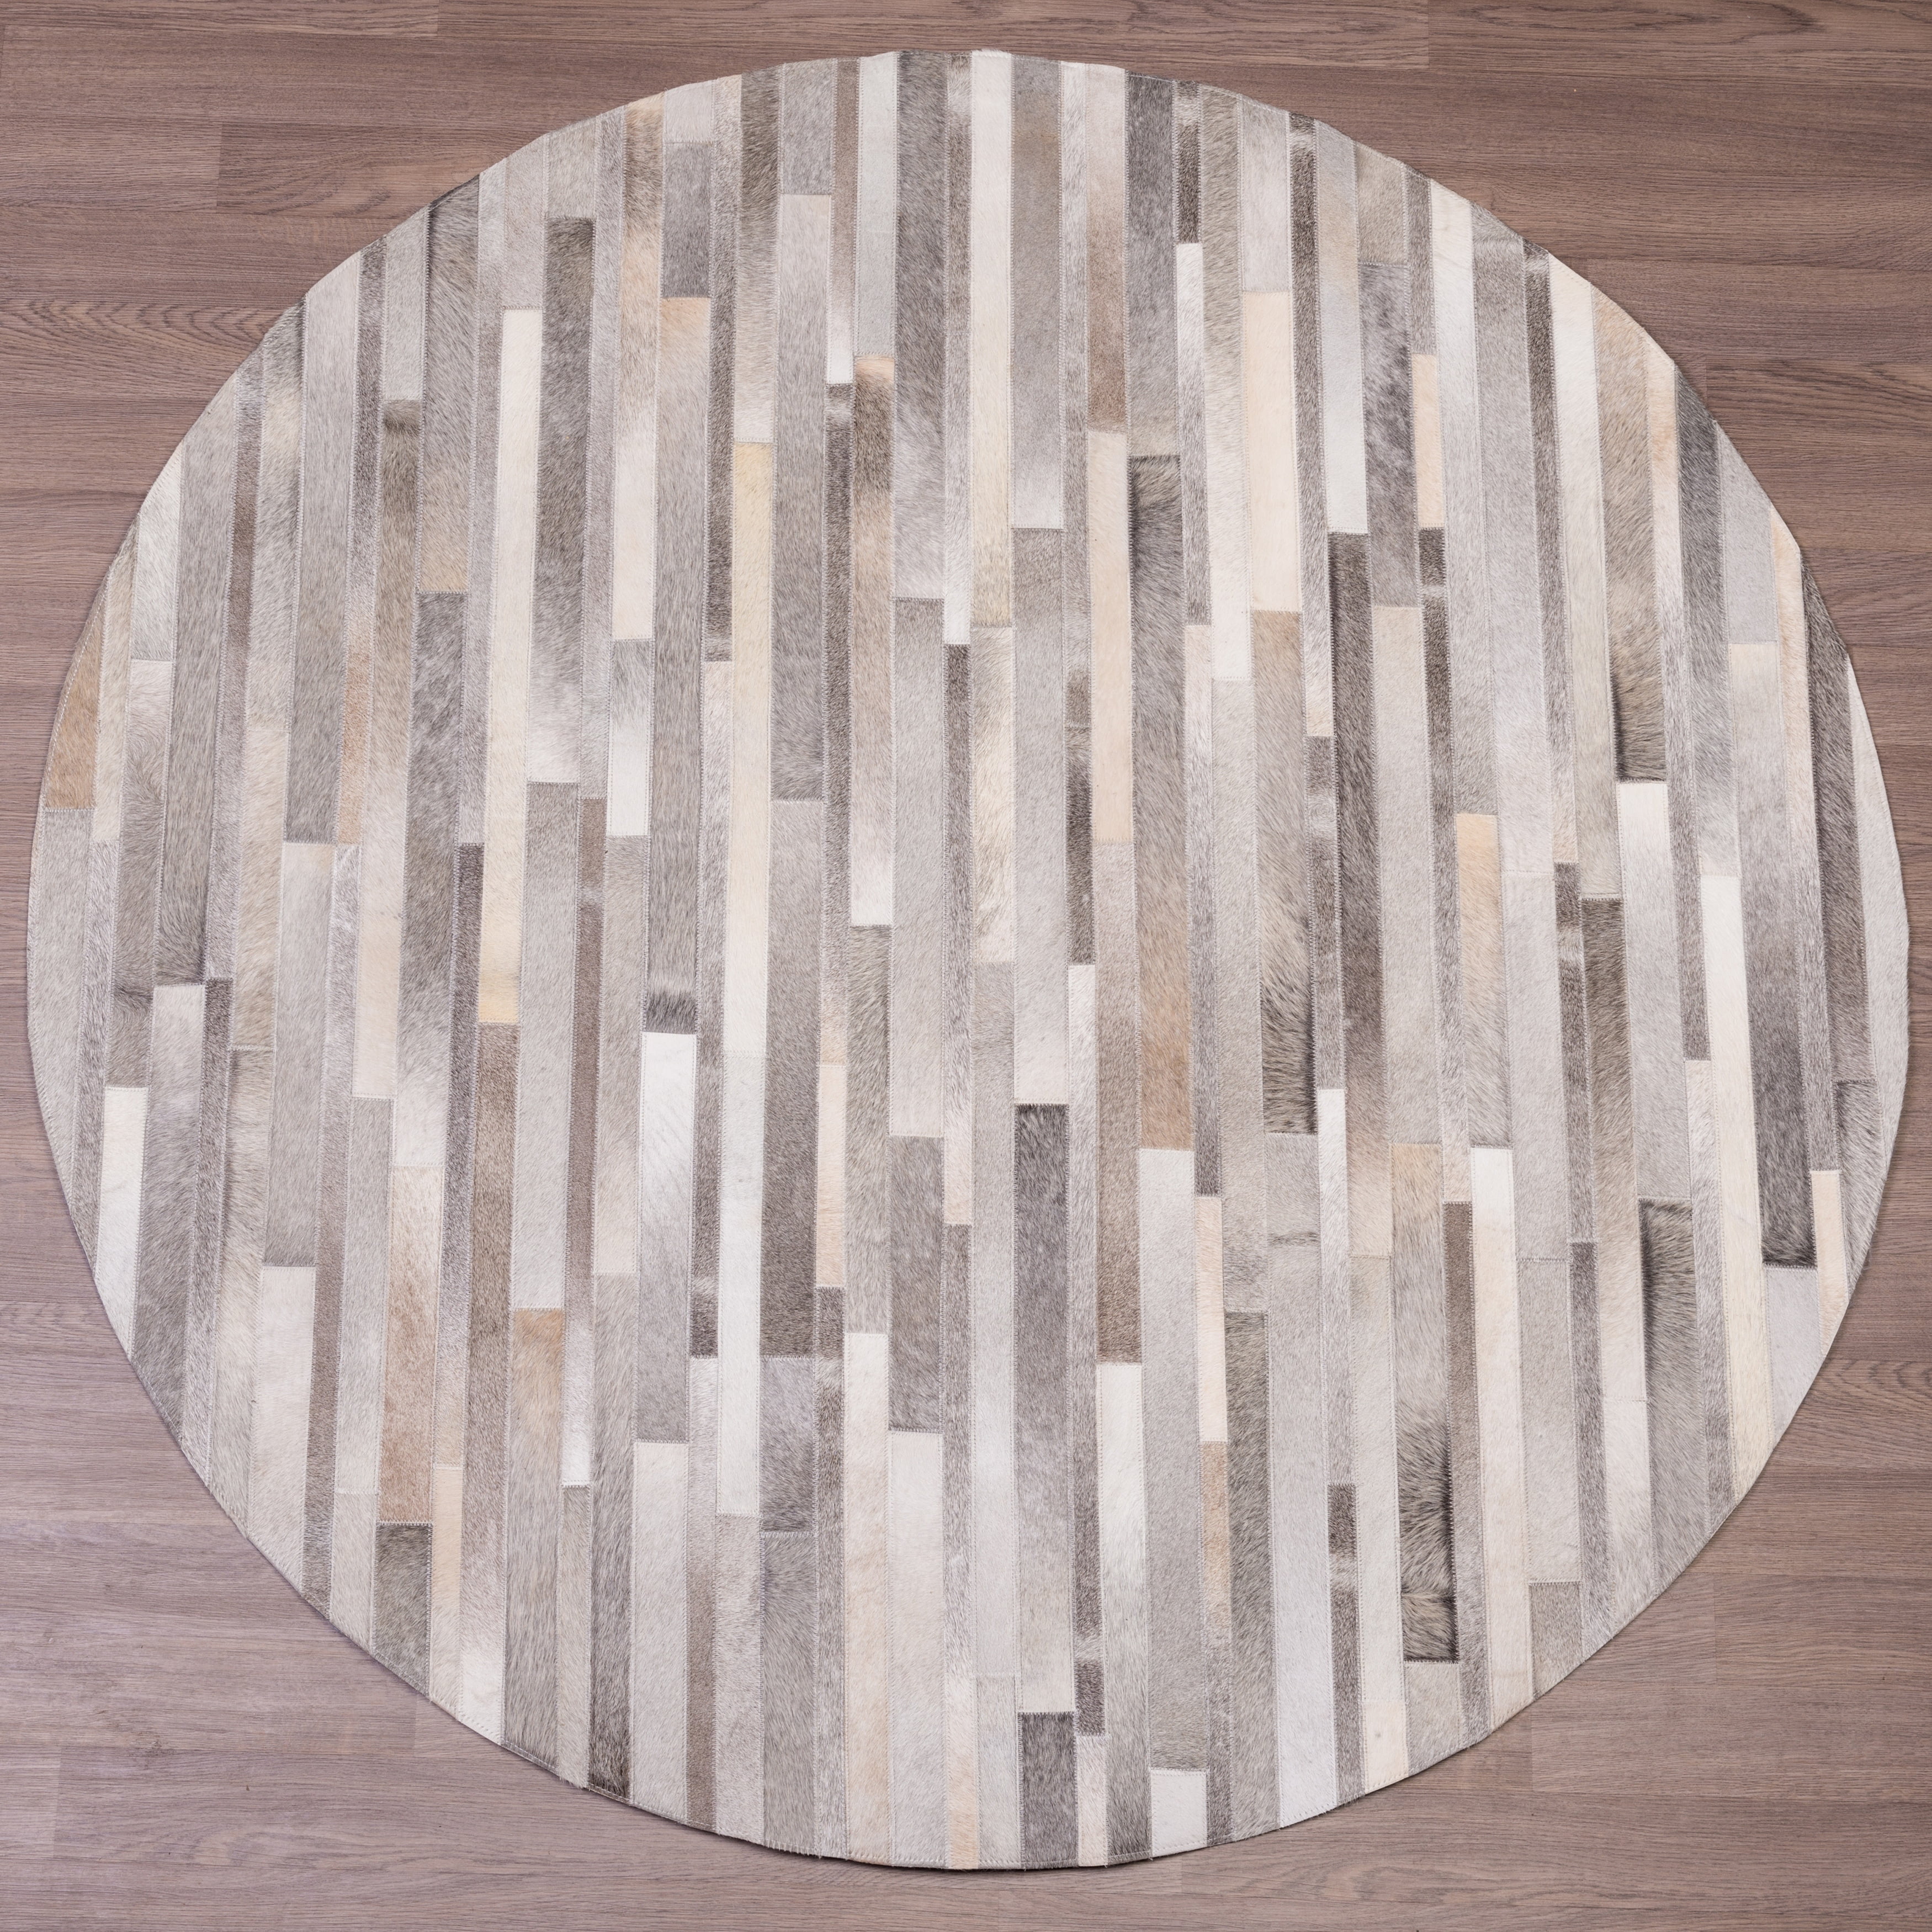 Hand Stitched Grey Cow Hide Leather, Round Cowhide Rug